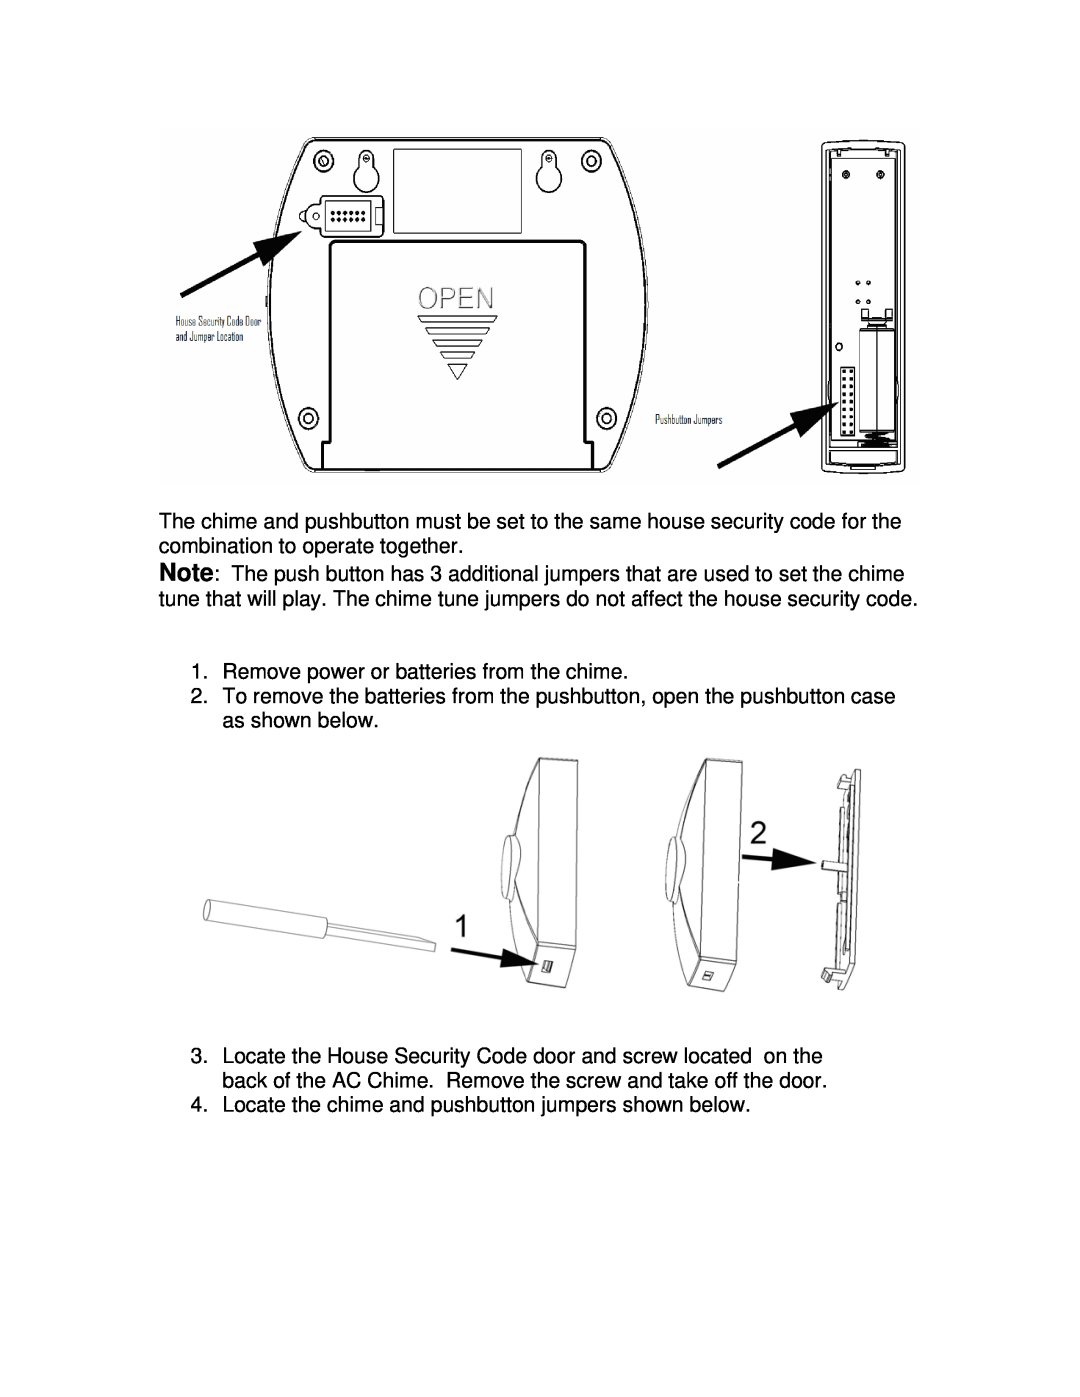 Jasco GE 19209 installation instructions Remove power or batteries from the chime 